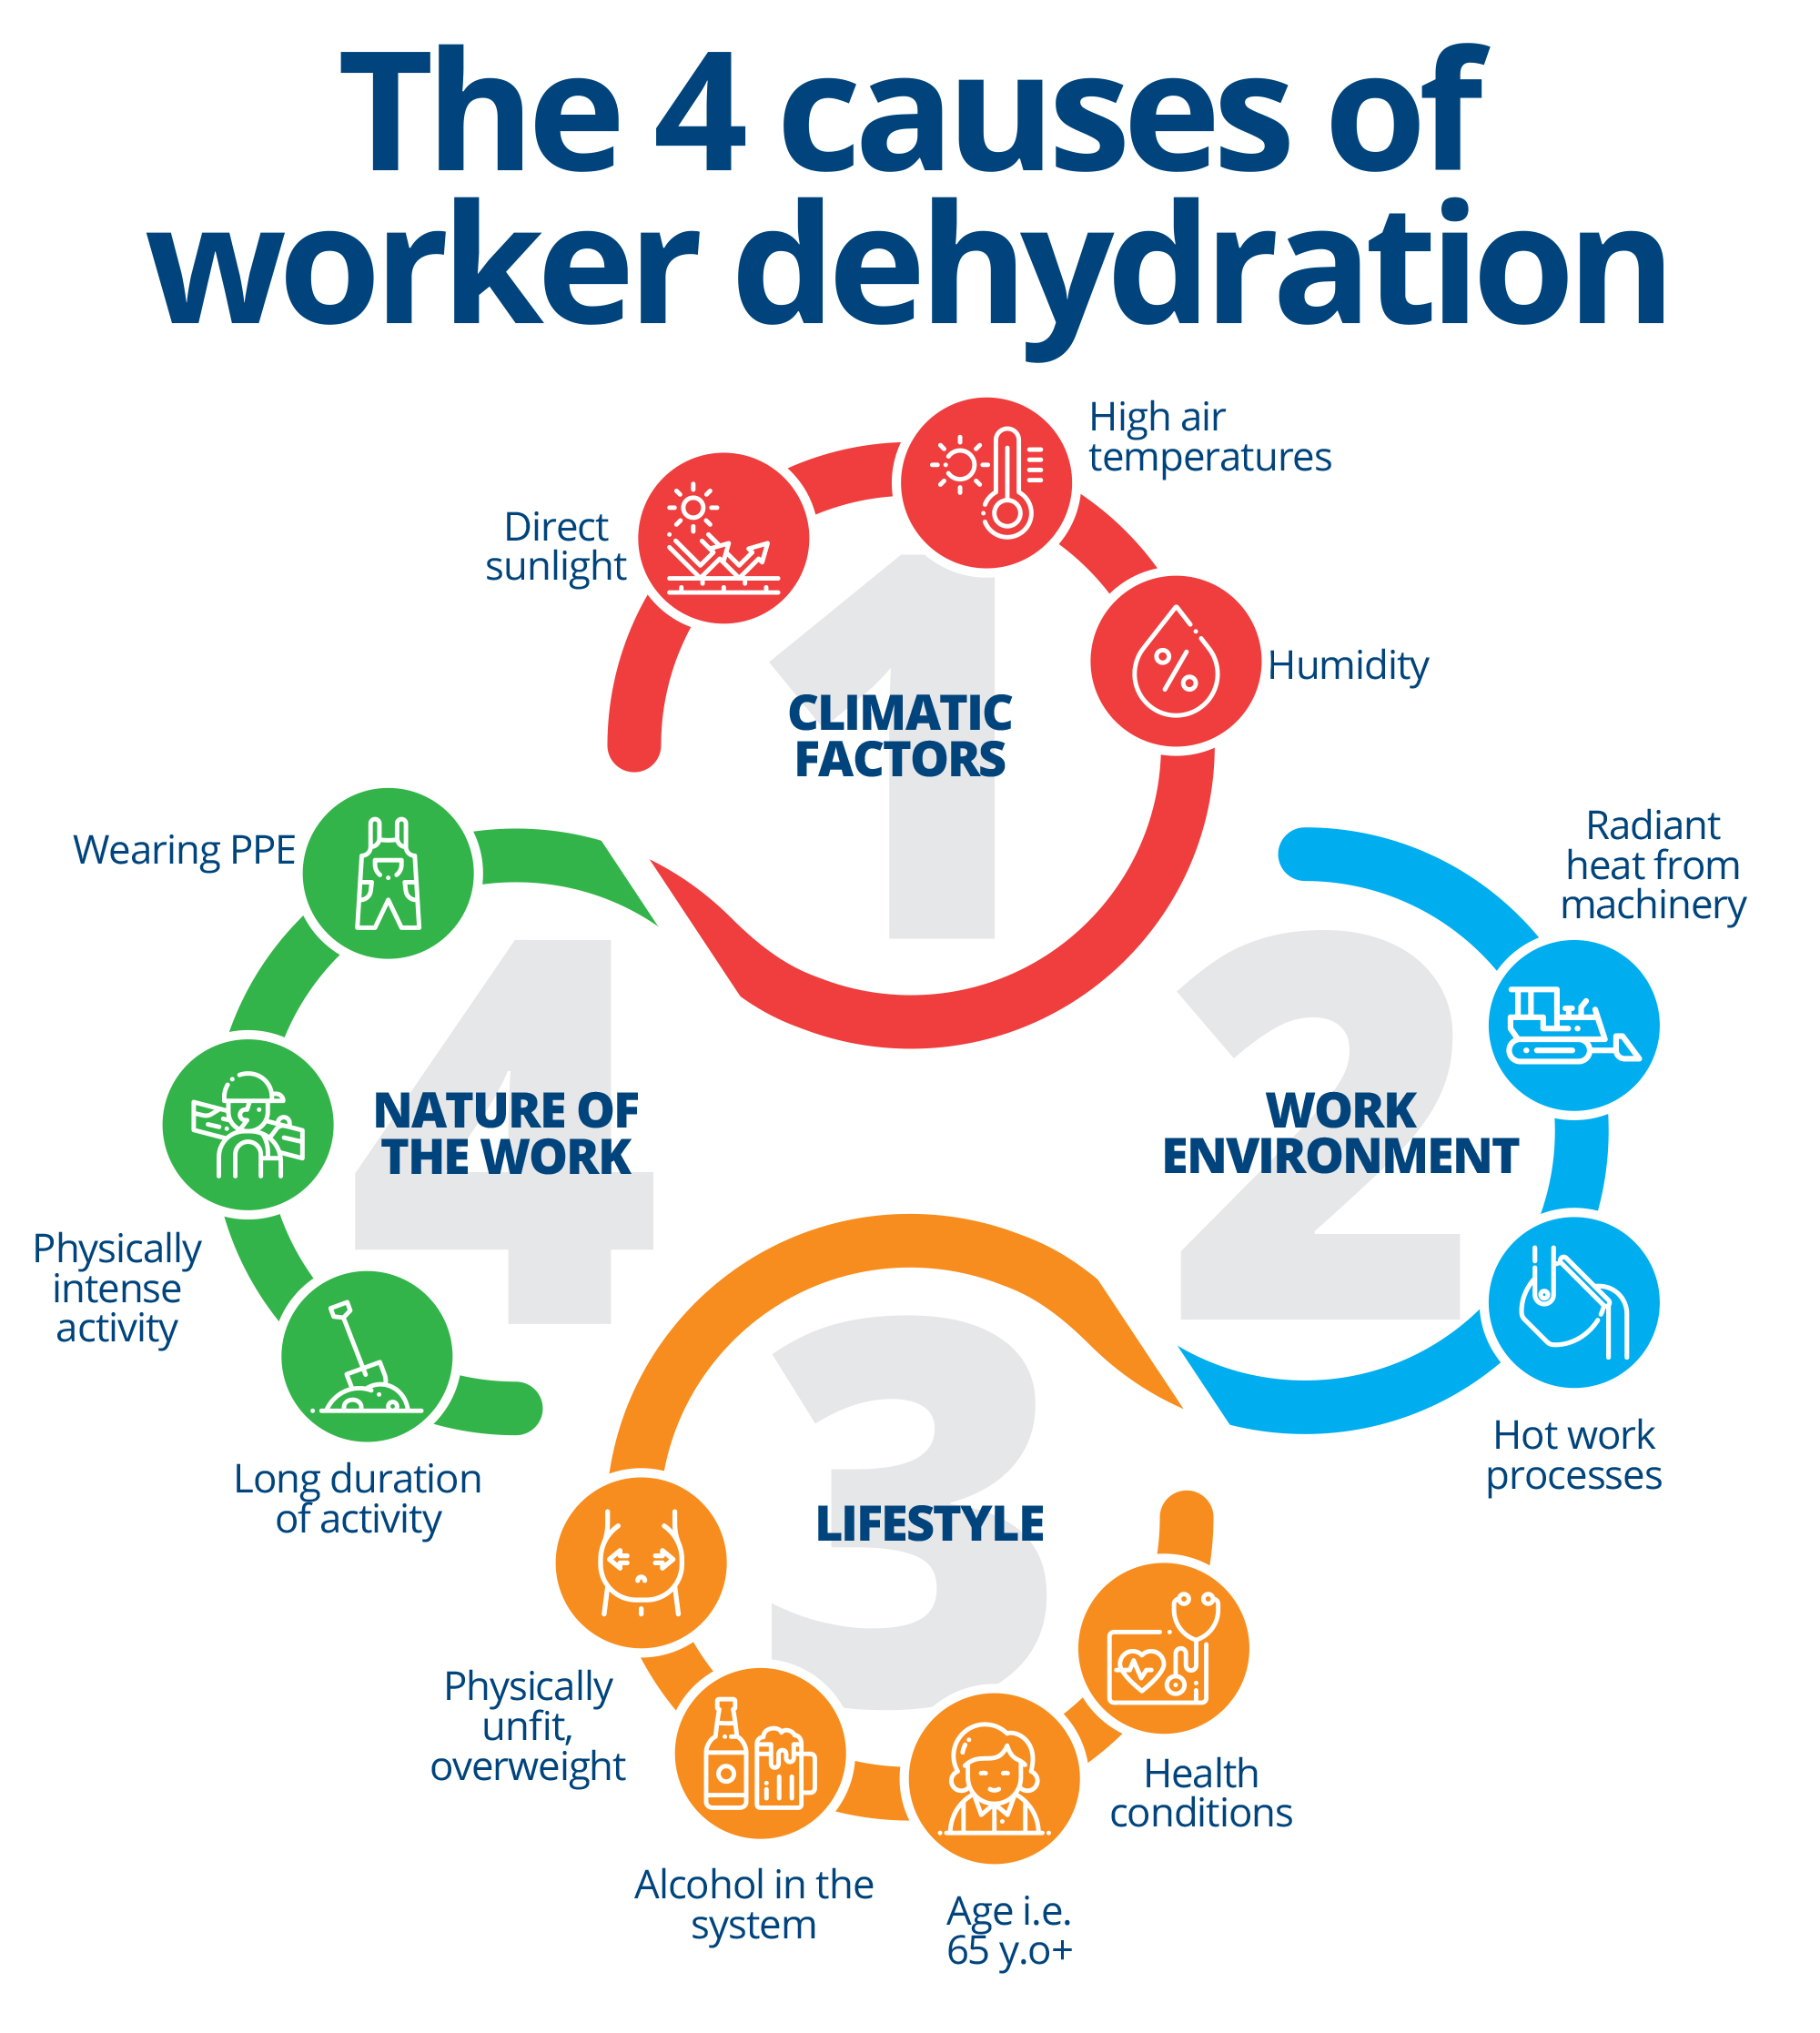 Dehydration causes